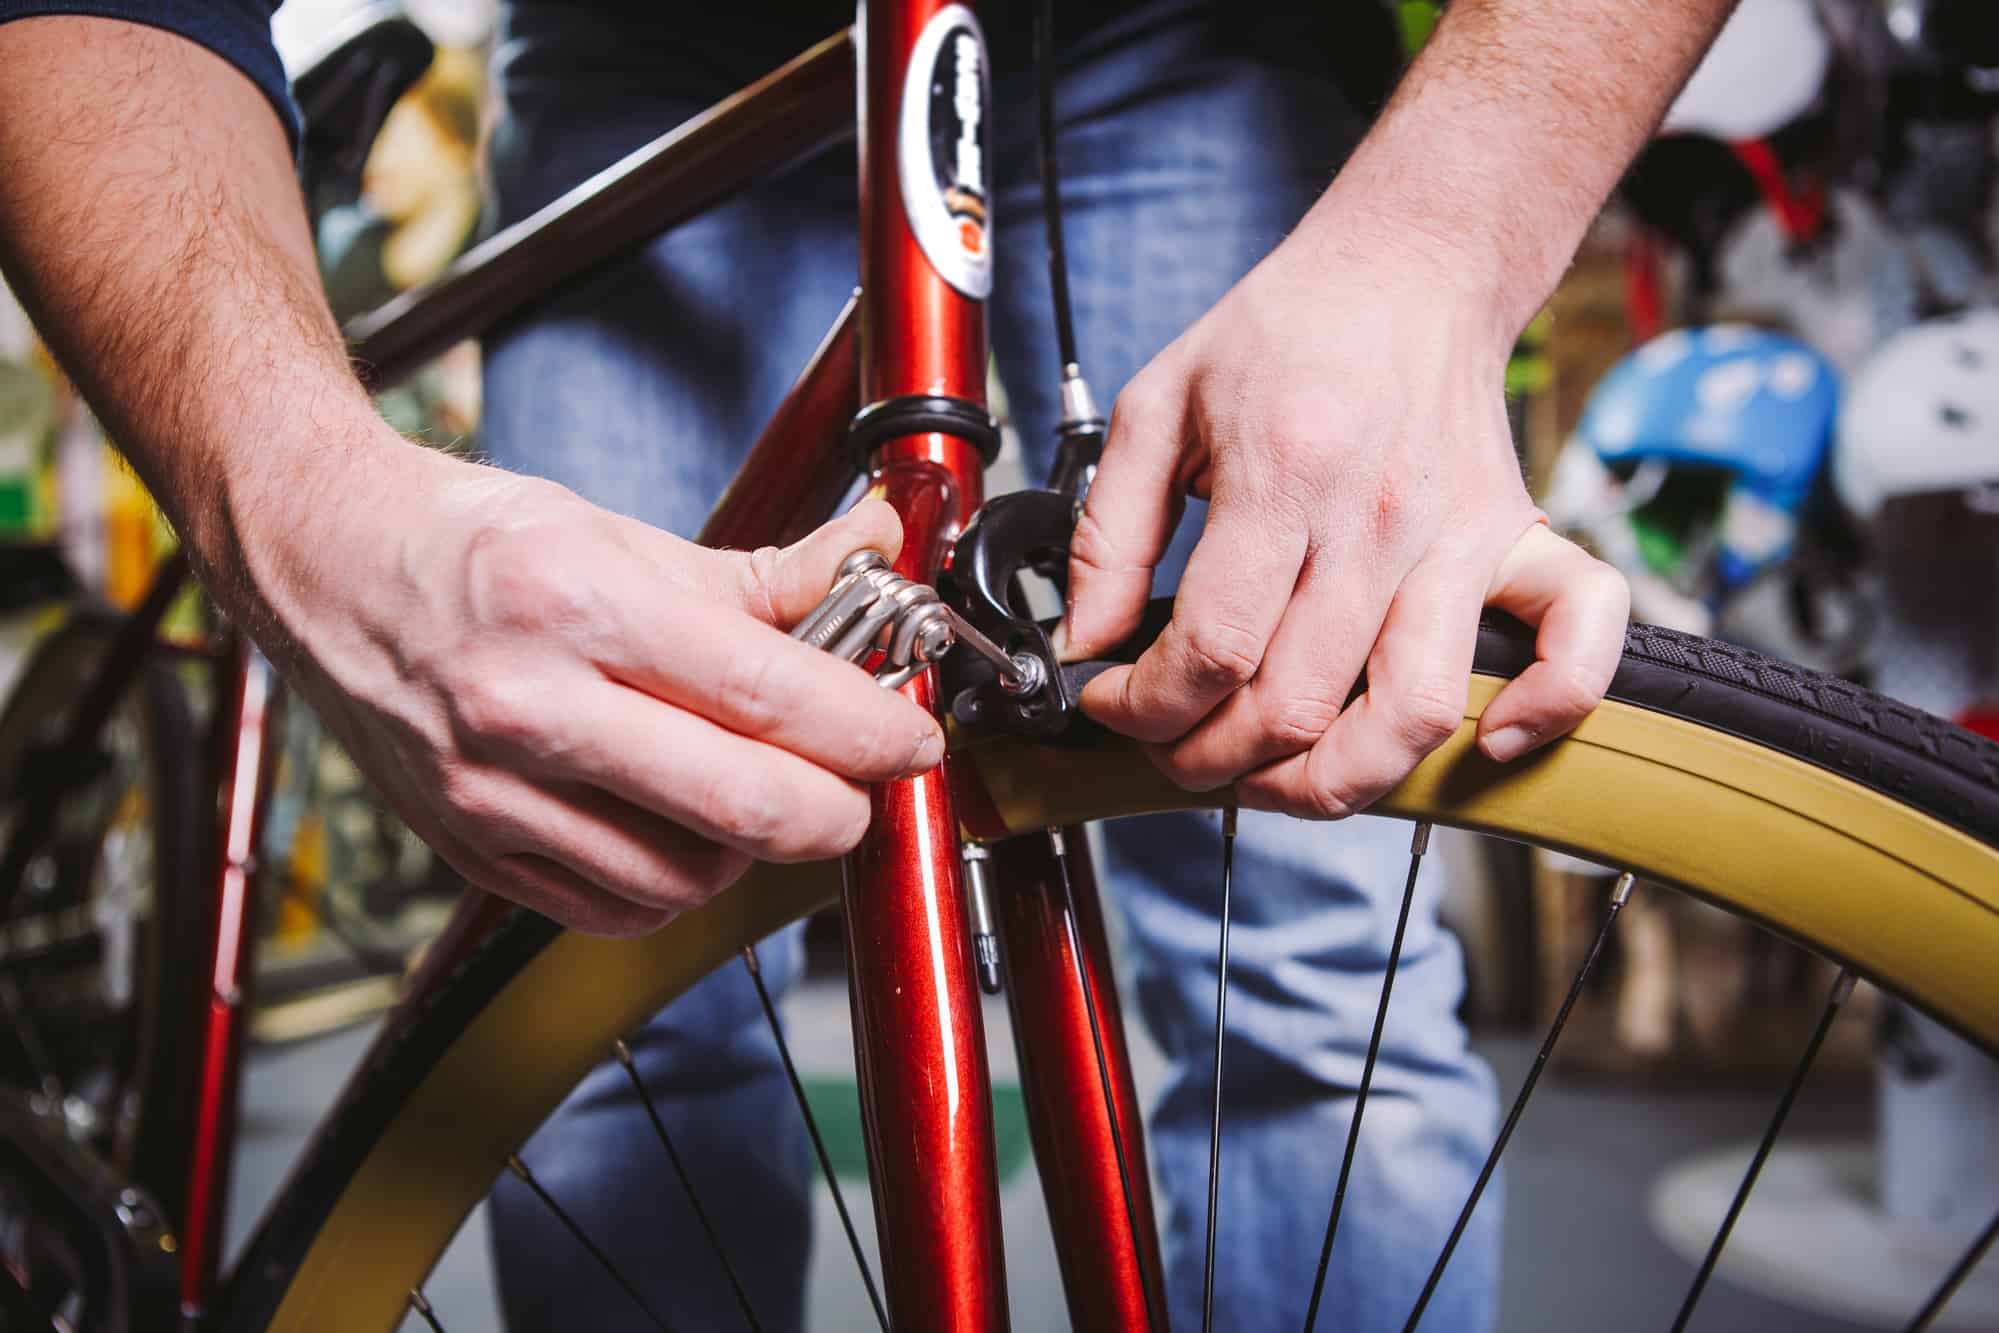 Theme repair bikes. Close up of a Caucasian man’s hand use a hand tool hexagon set to adjust and install Rim Brakes on a red bicycle